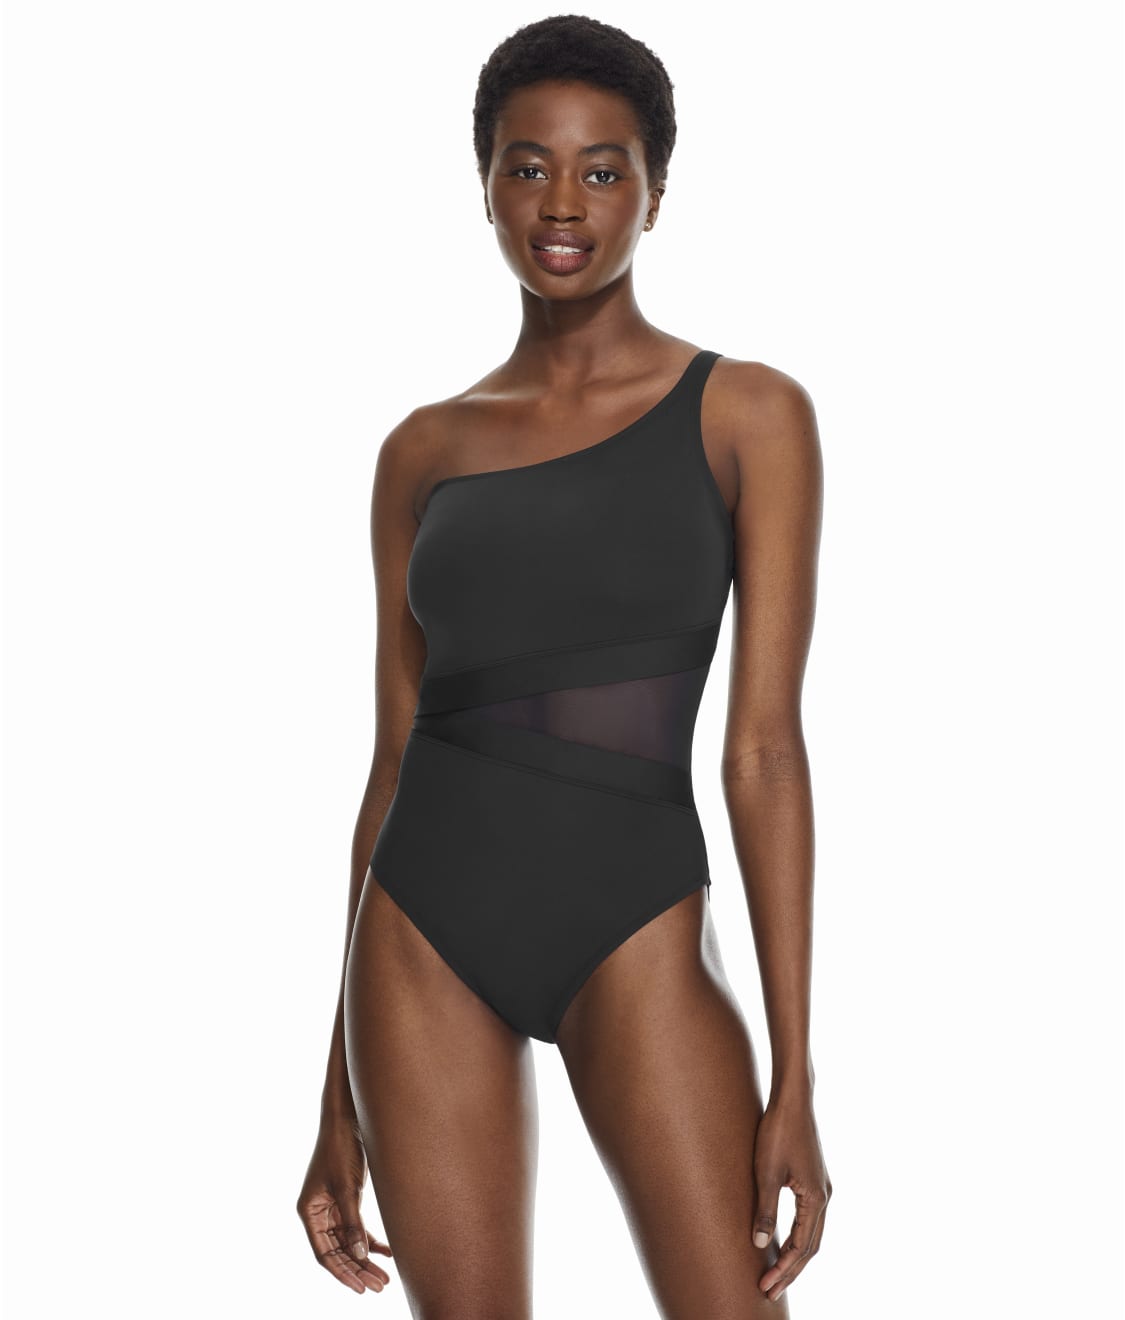 Bleu Rod Beattie Don't Mesh With Me High Neck One Piece Swimsuit